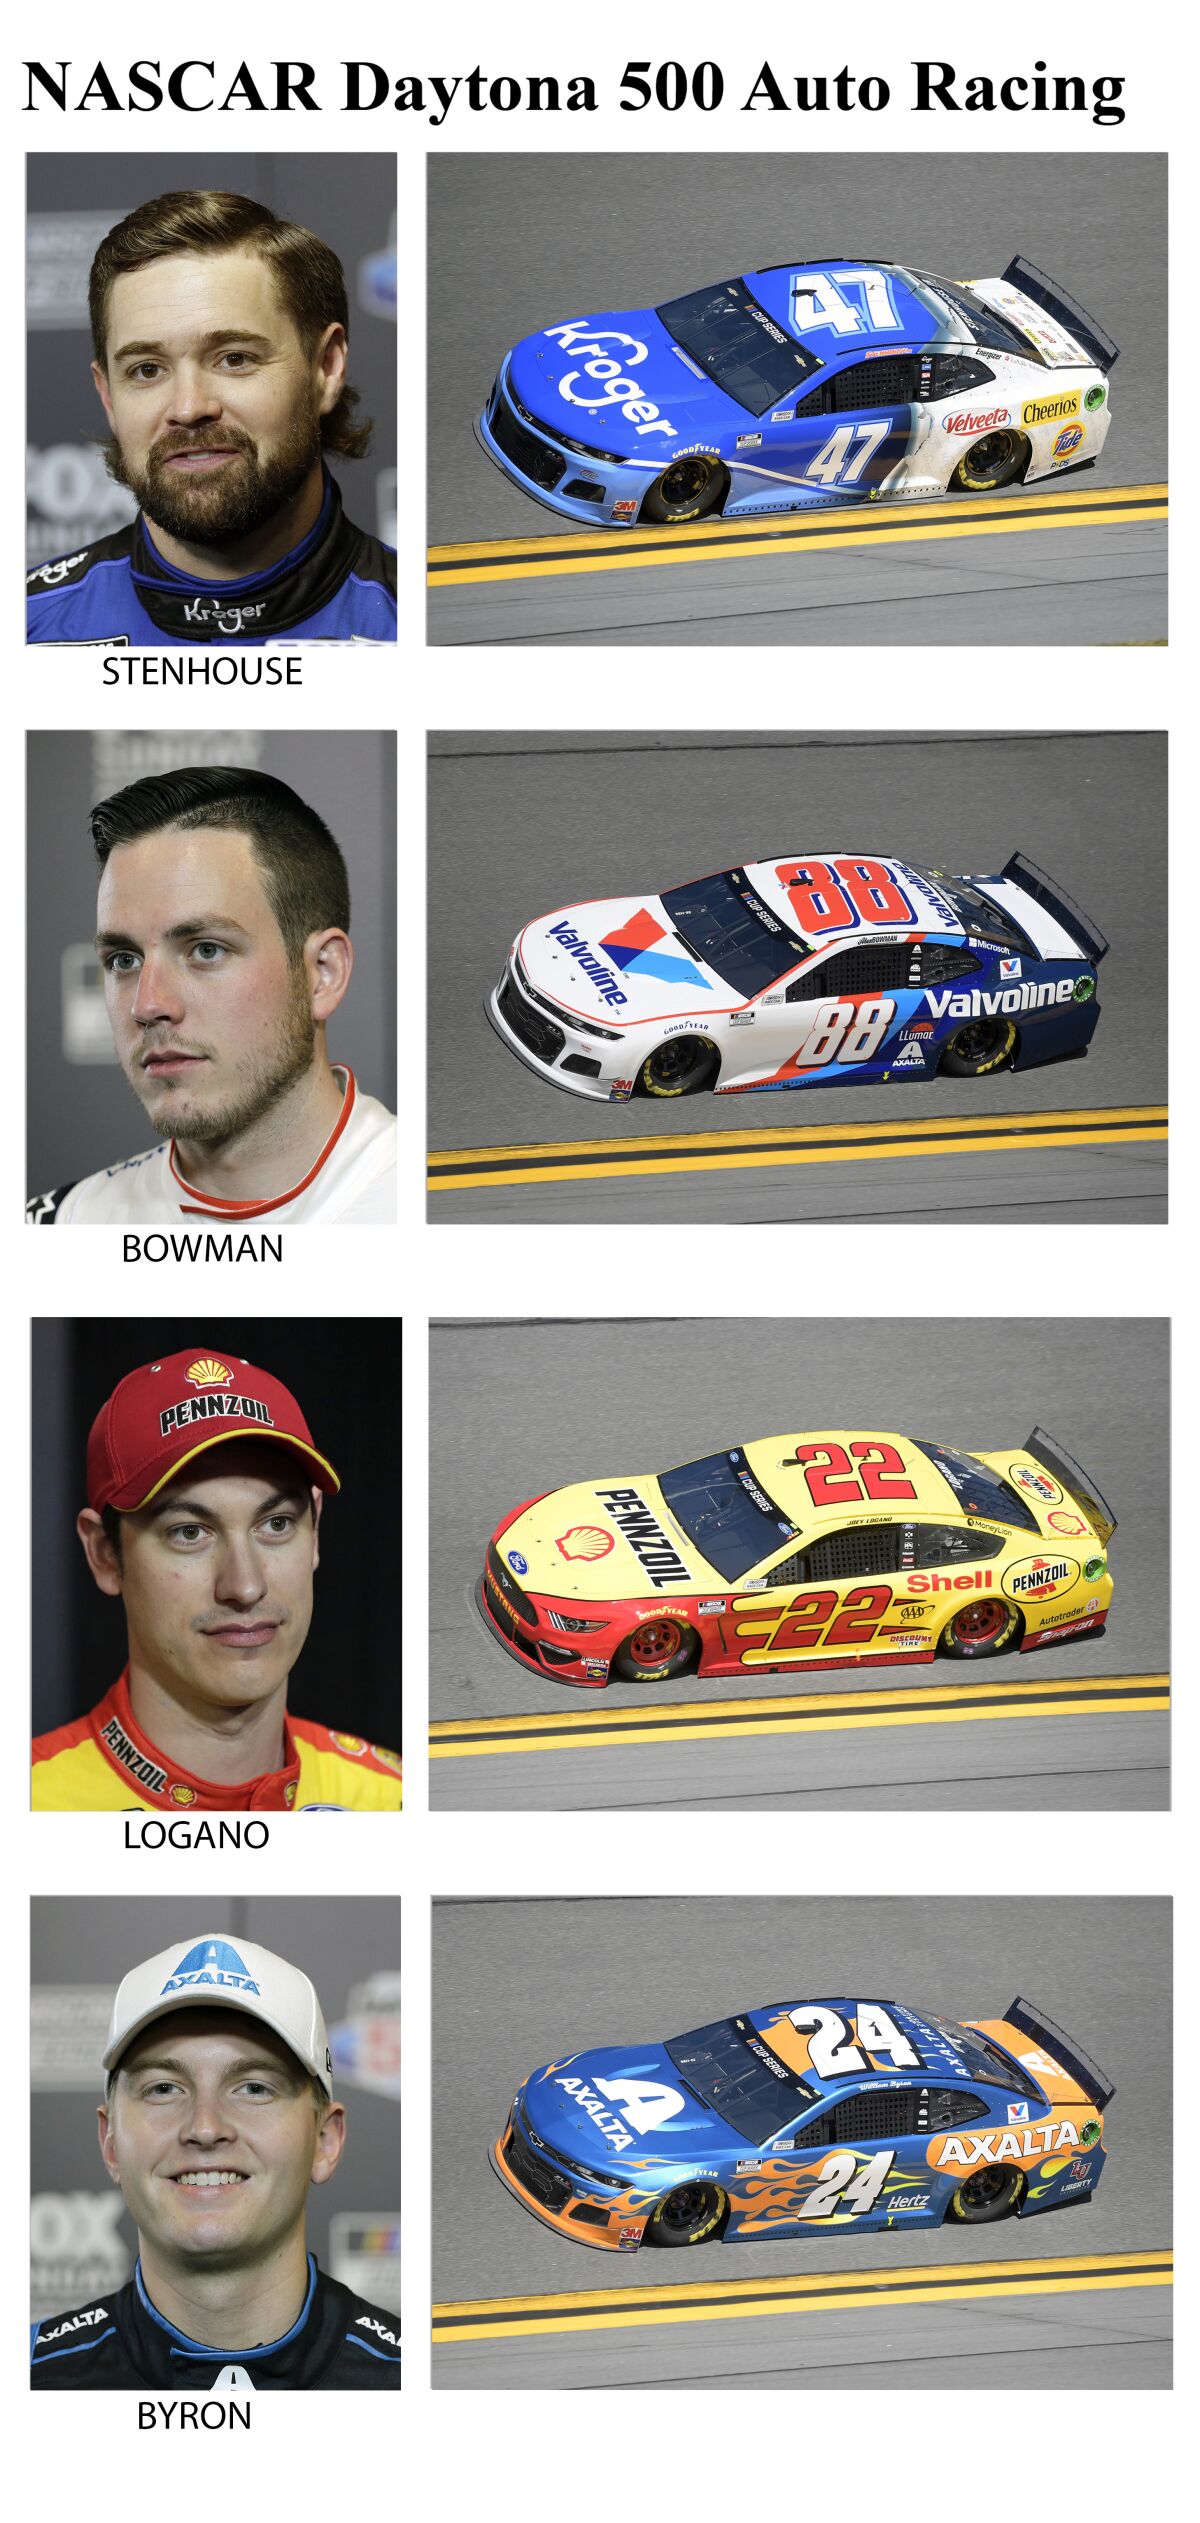 These photos taken in February 2020 show drivers in the starting lineup for Sunday's NASCAR Daytona 500 auto race in Daytona Beach, Fla. From top are Ricky Stenhouse Jr., starting in the first position; Alex Bowman, second position; Joey Logano, third position and William Byron, fourth position. (AP Photo)